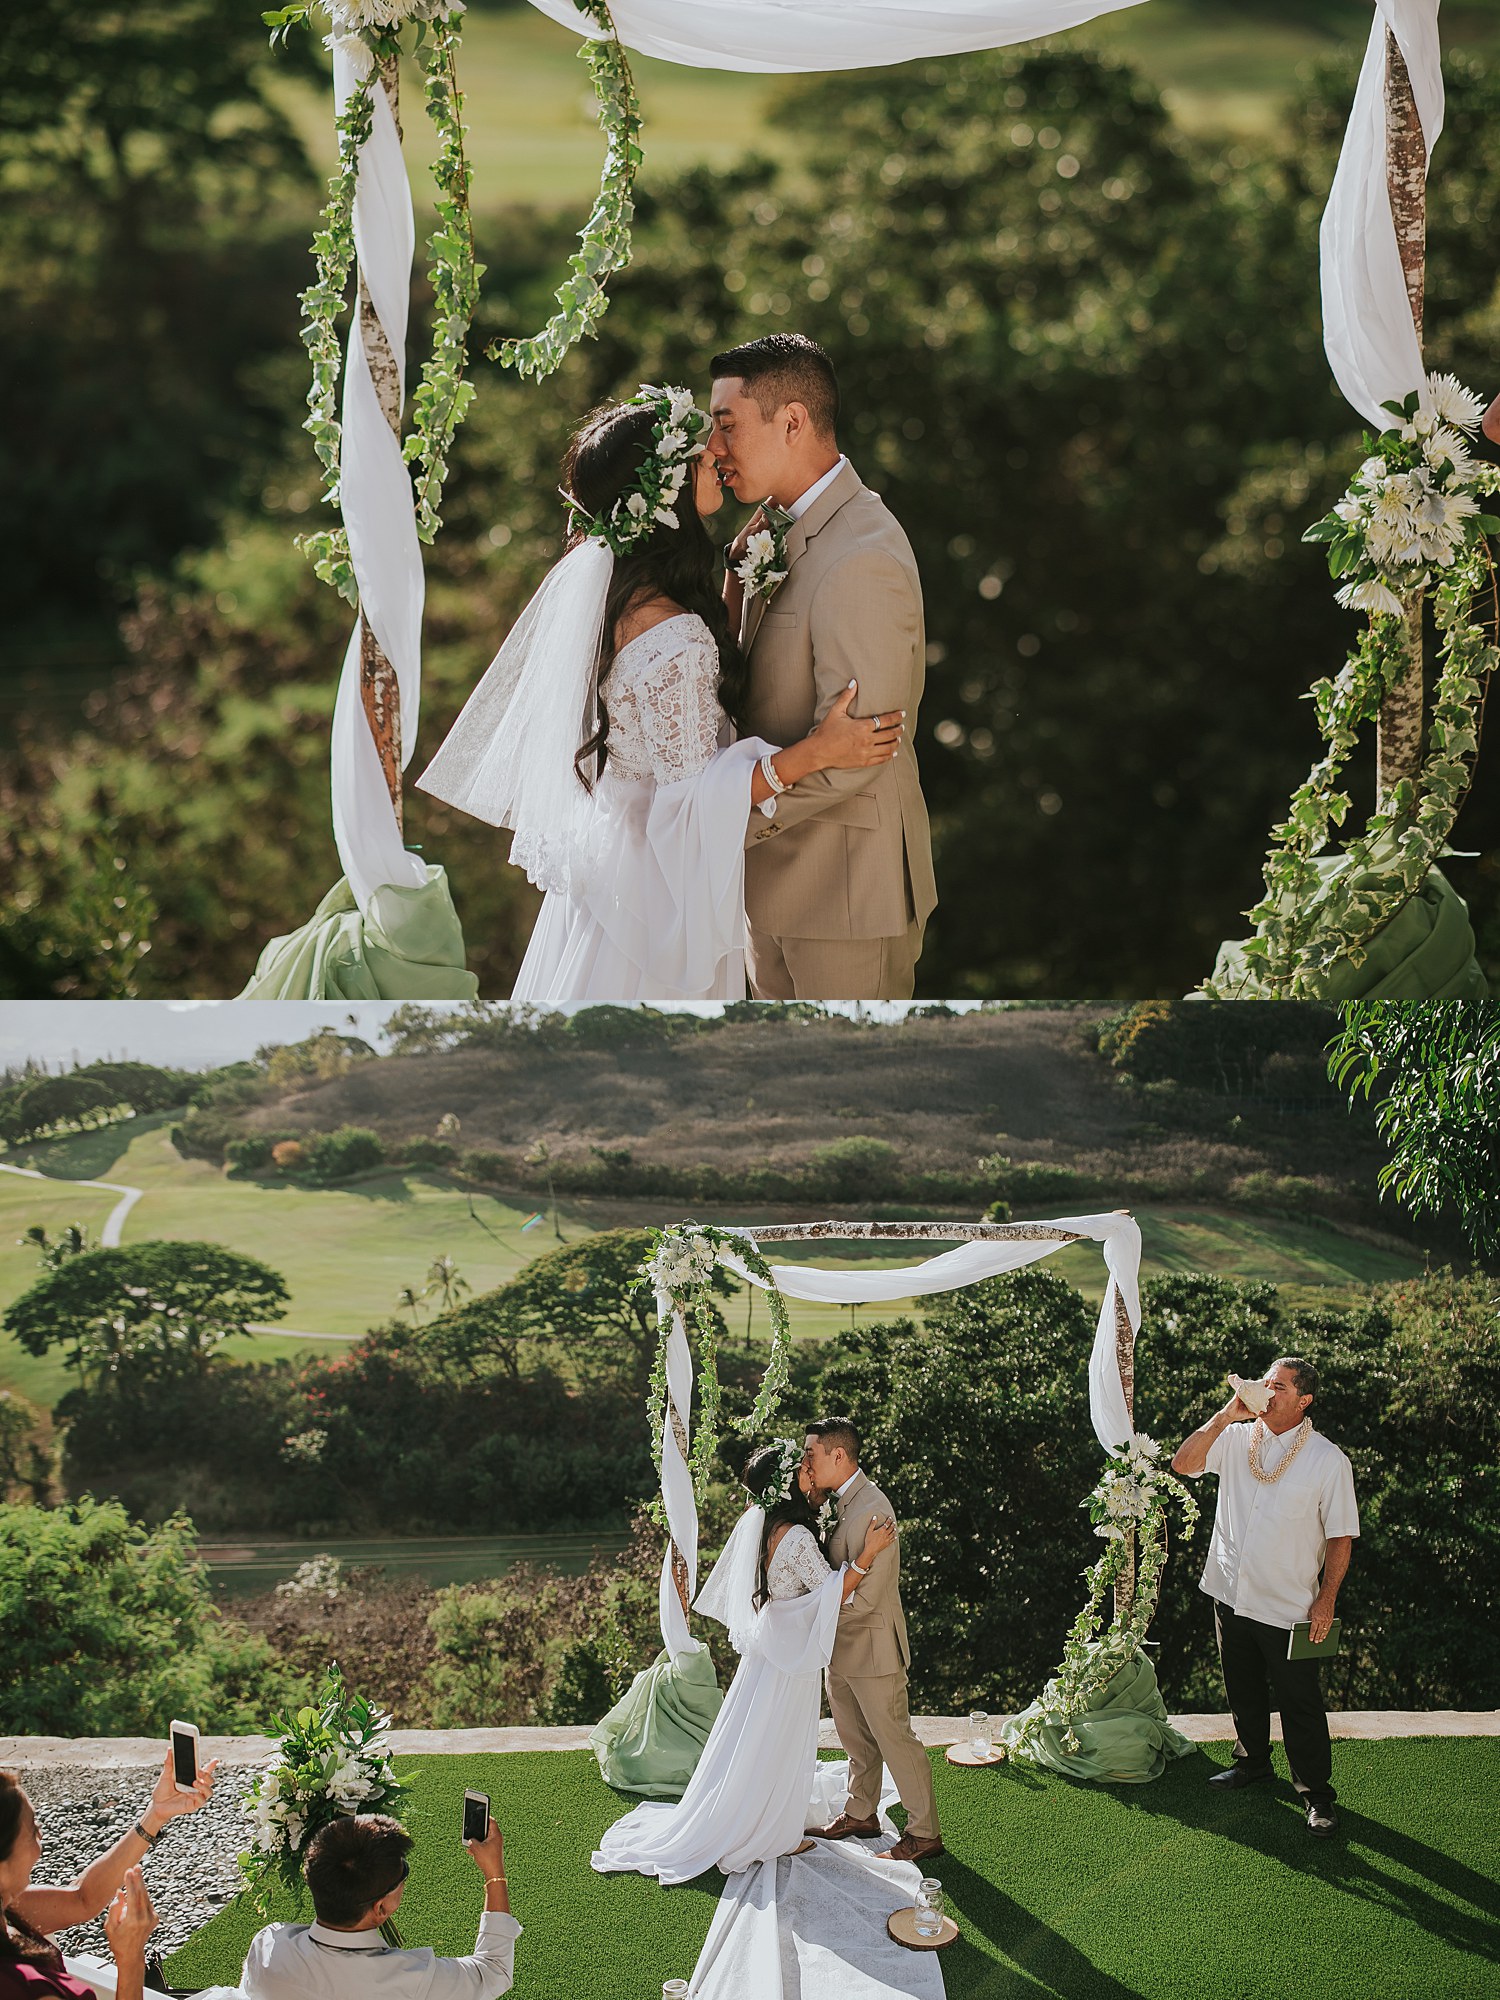 elopement during hawaii's covid restrictions